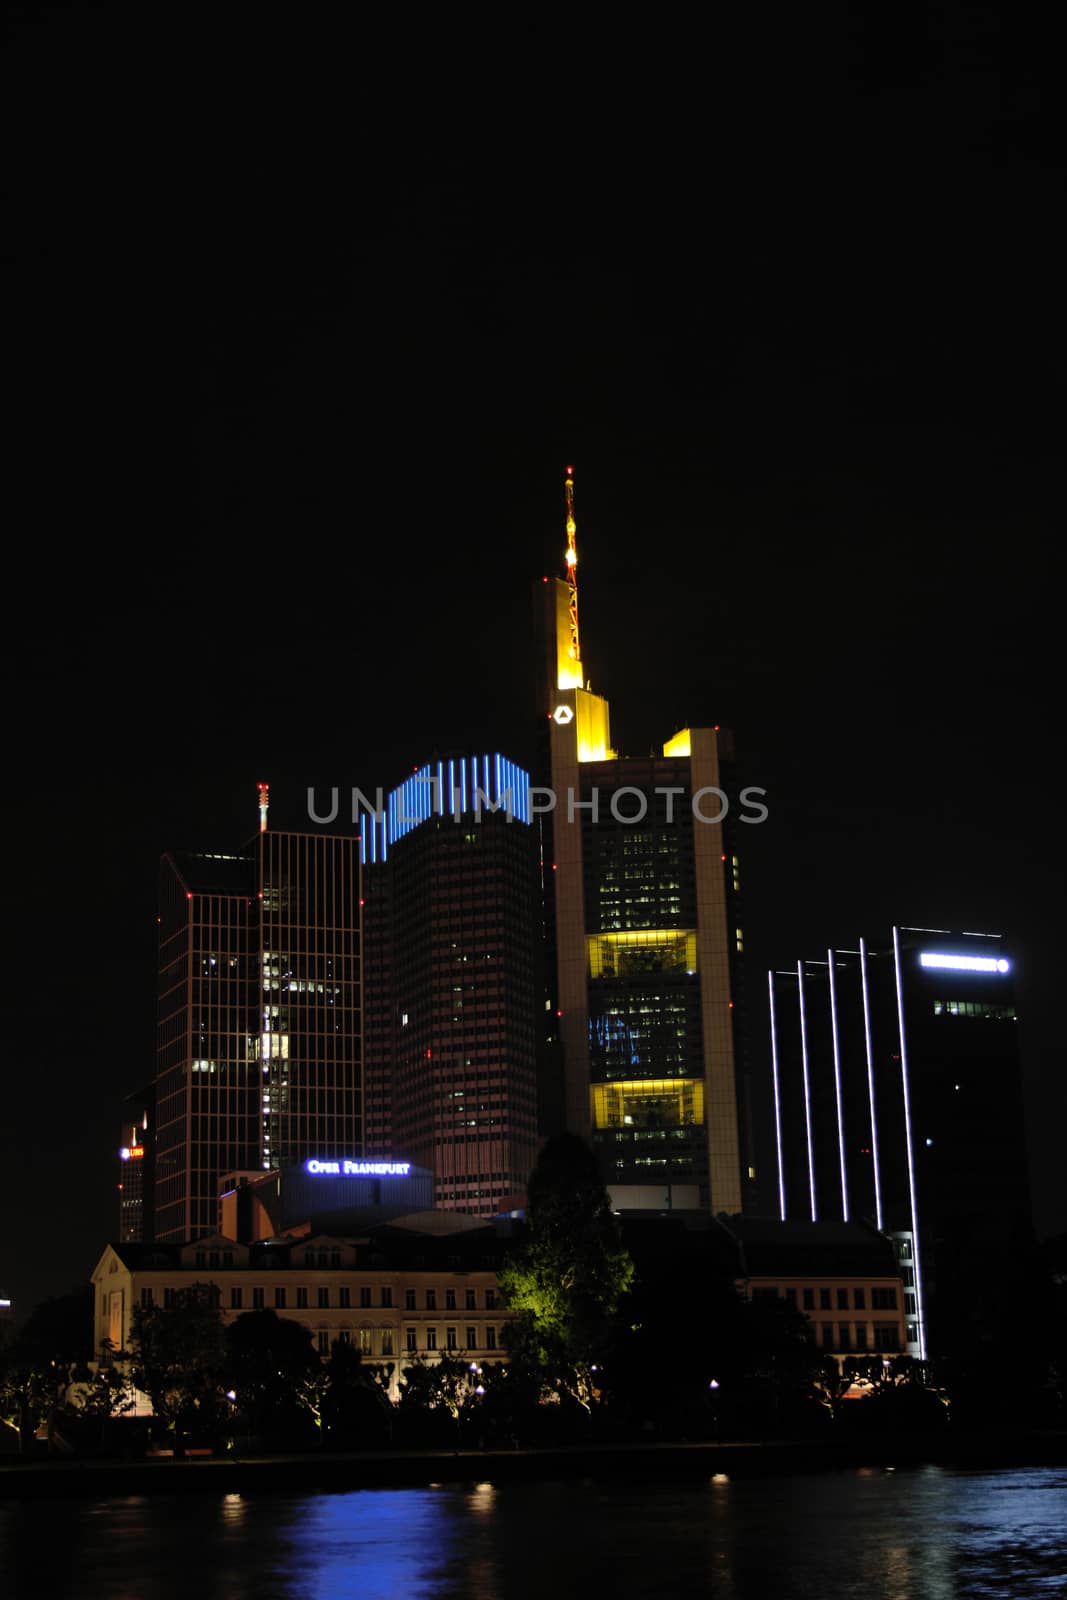 FRANKFURT AM MAIN, GERMANY, MAY The 1st 2014: Banking district in  Frankfurt am Main by night, Germany, Europe. Picture taken on May the 1st 2014.